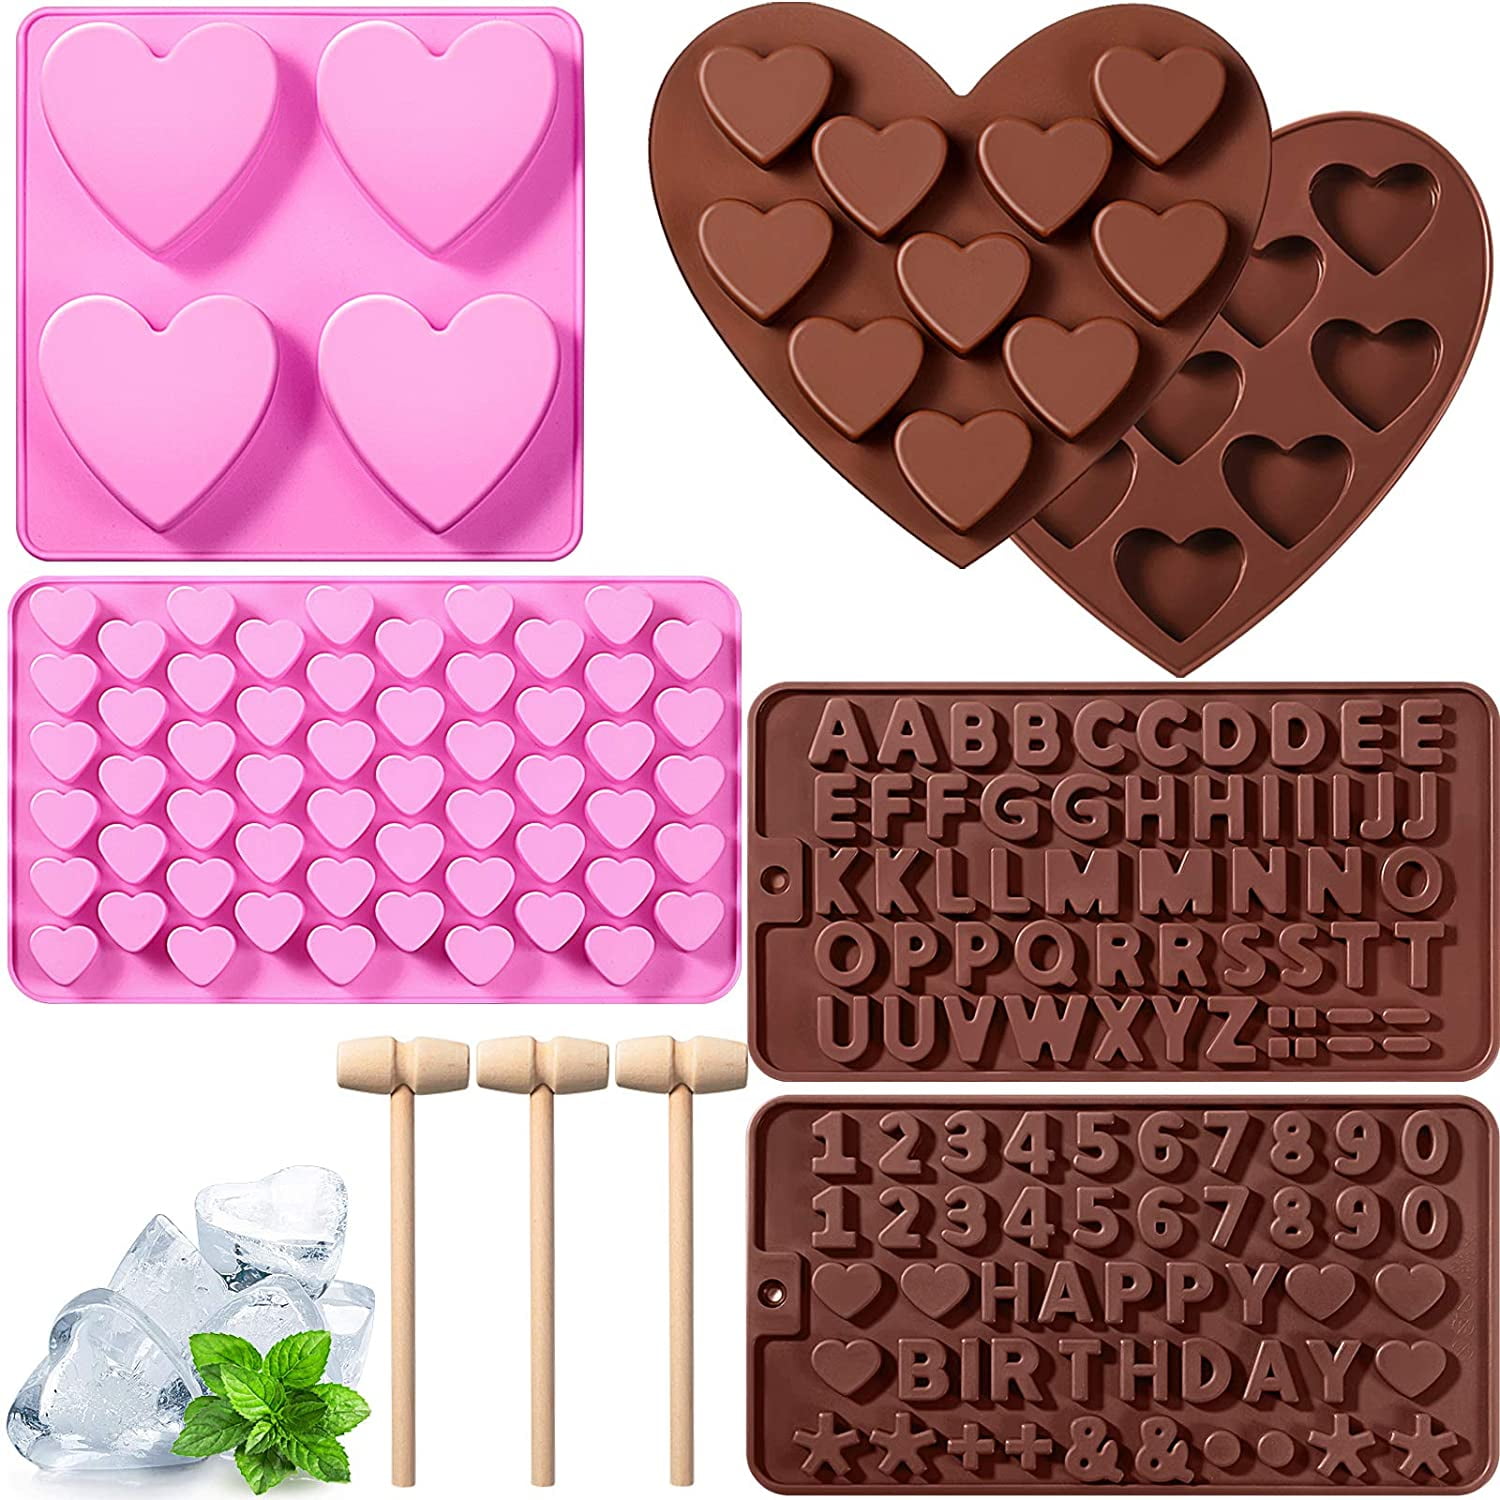 Mini Small Heart Ice Cube Silicone Soap Mold Chocolate Candy Cake Making Mold 